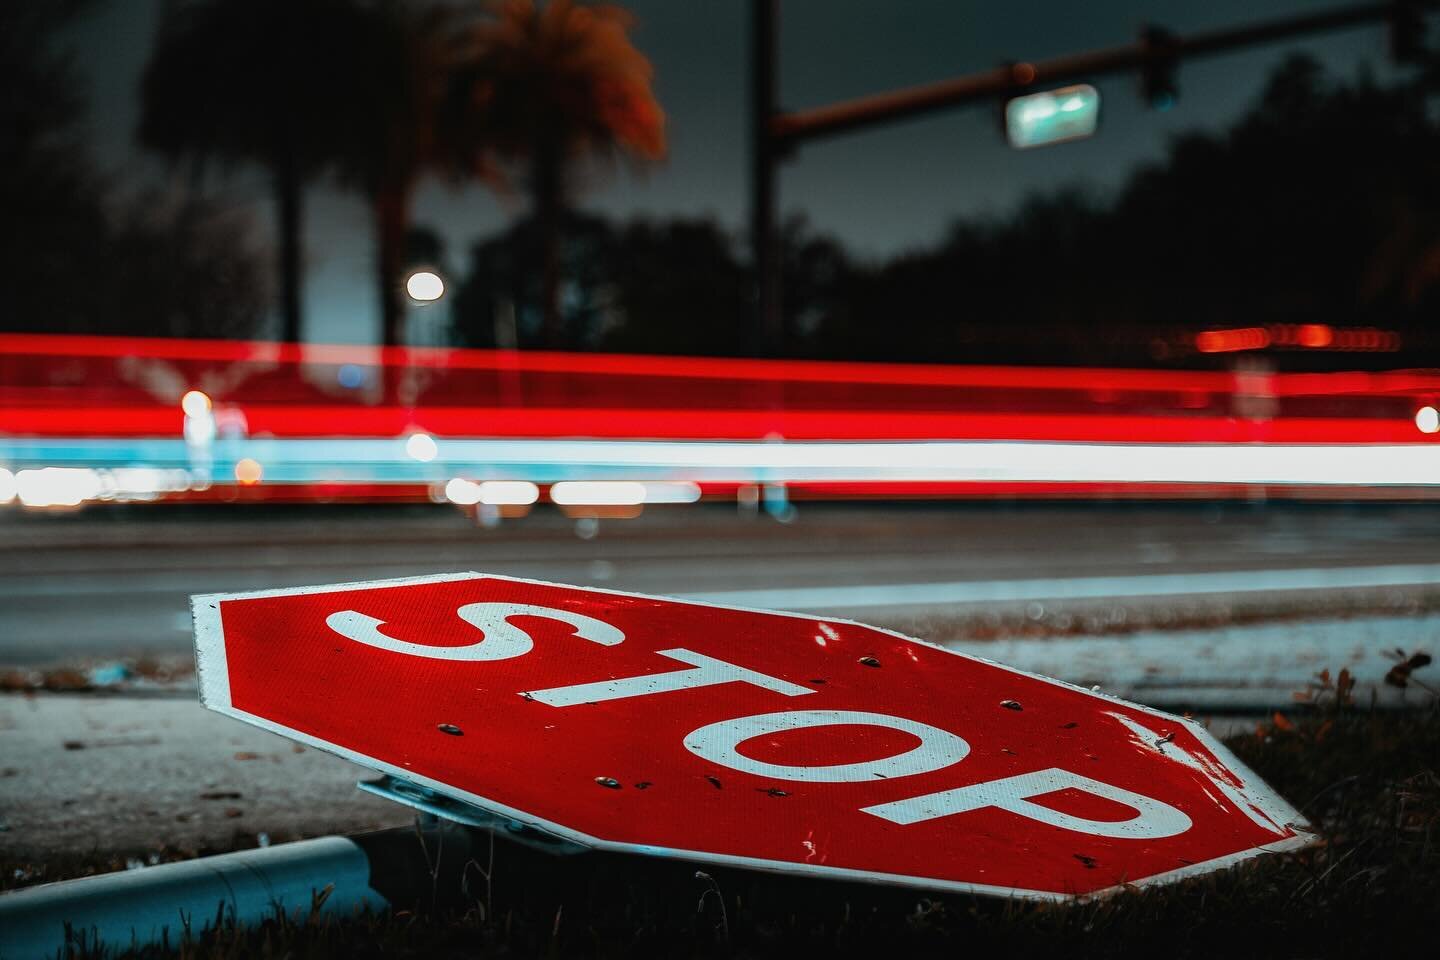 Back to some city shooting, and wandering the streets at night. &lsquo;bout to get a lot of steps in around this airport. 🤗 
 ⠀⠀⠀⠀⠀⠀⠀⠀⠀⠀⠀⠀ 
 ⠀⠀⠀⠀⠀⠀⠀⠀⠀⠀⠀⠀ 
#stop #stopsign #sign #orlandophotography #orlandonights #orlandonightlife #thecitybeautiful 
